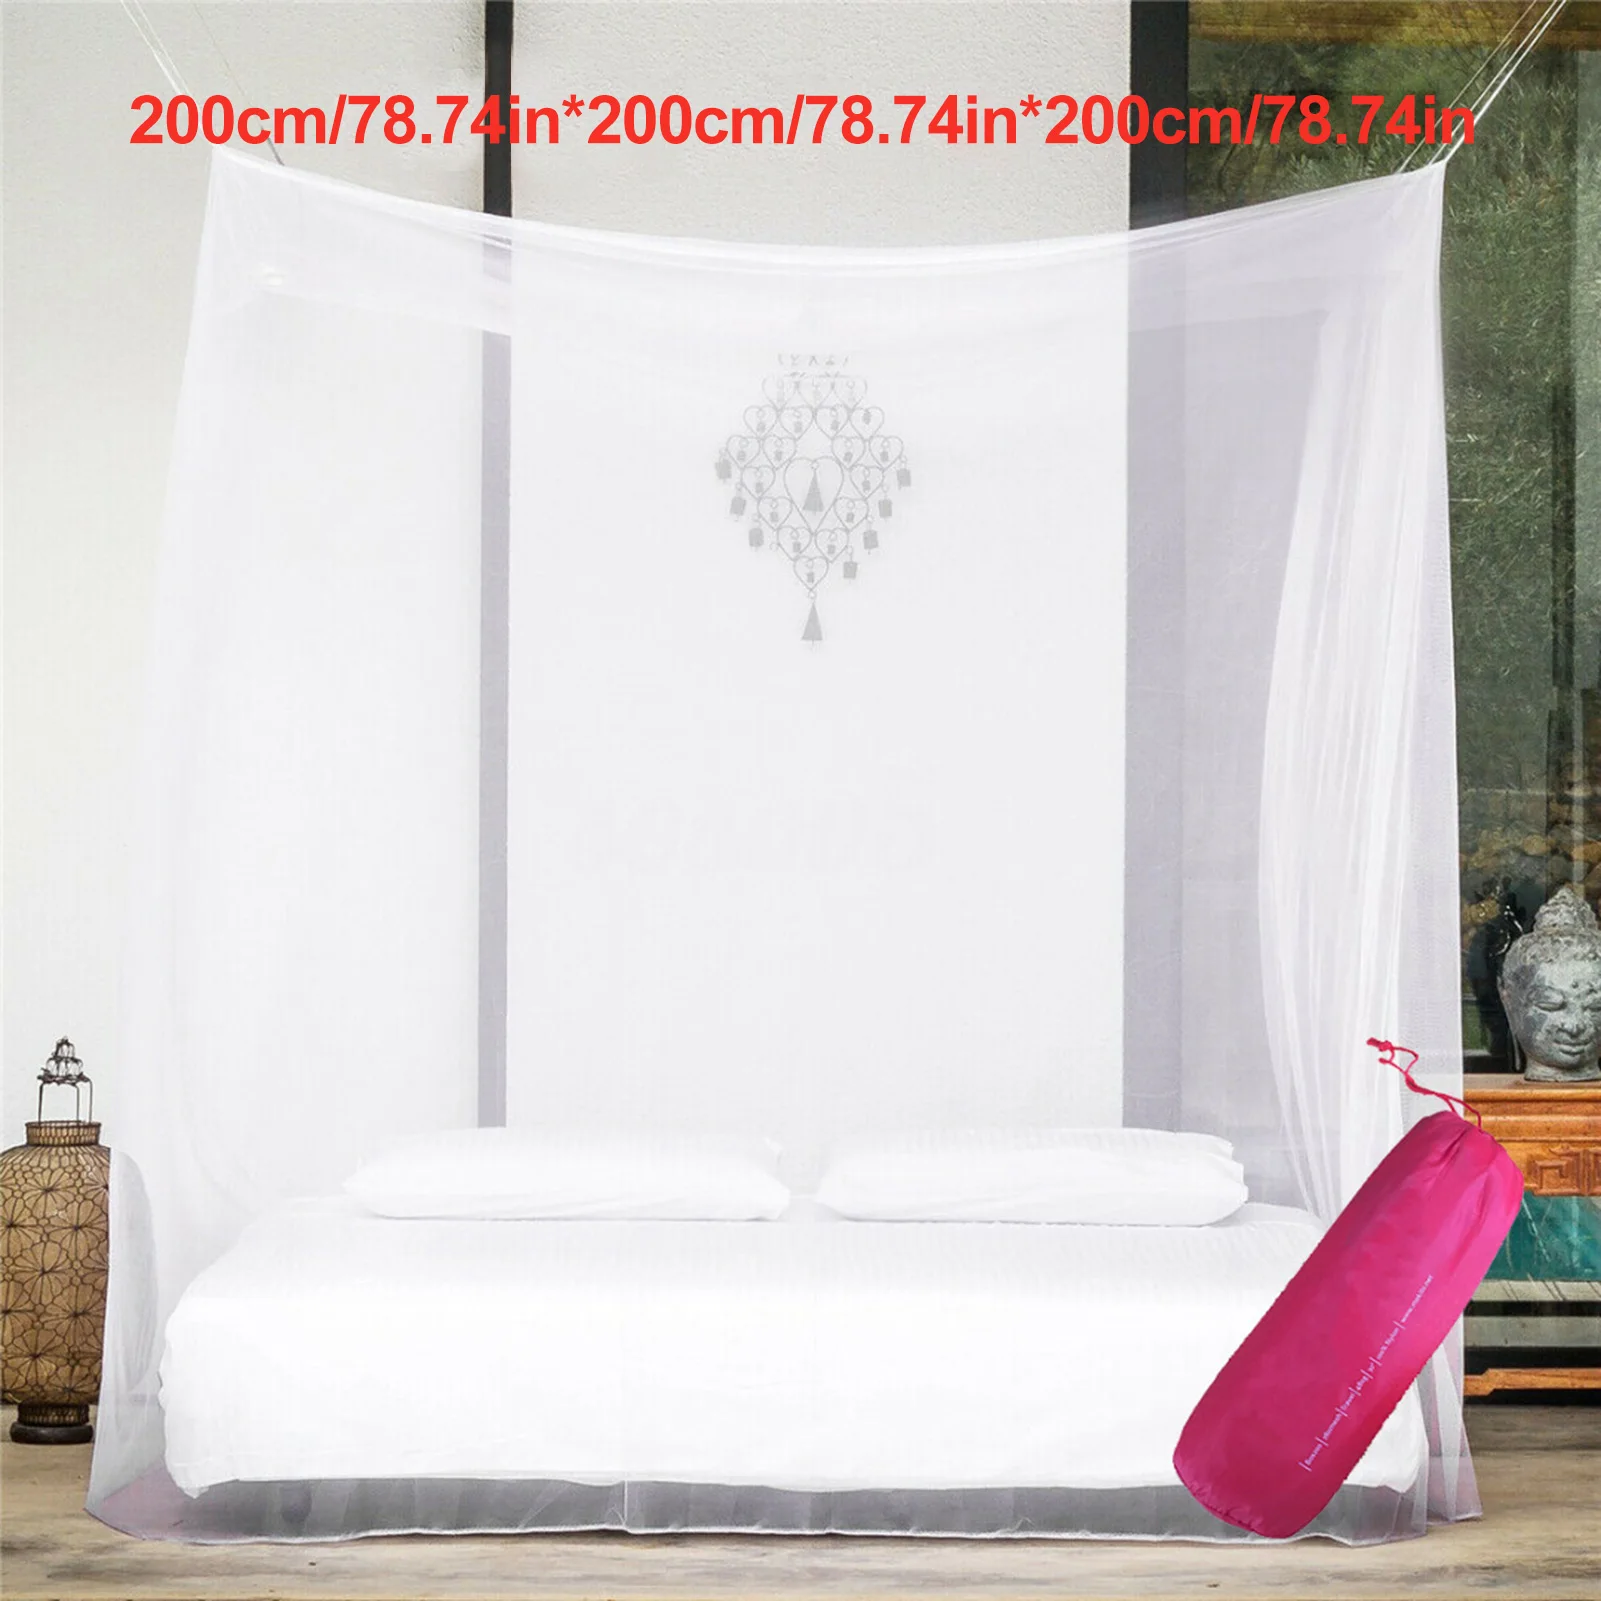 Mosquitoes Screen Net For Bed White Mosquitoes Screen Sleeping Net White Mosquitoes Netting Canopy For Indoor Outdoor Use images - 6